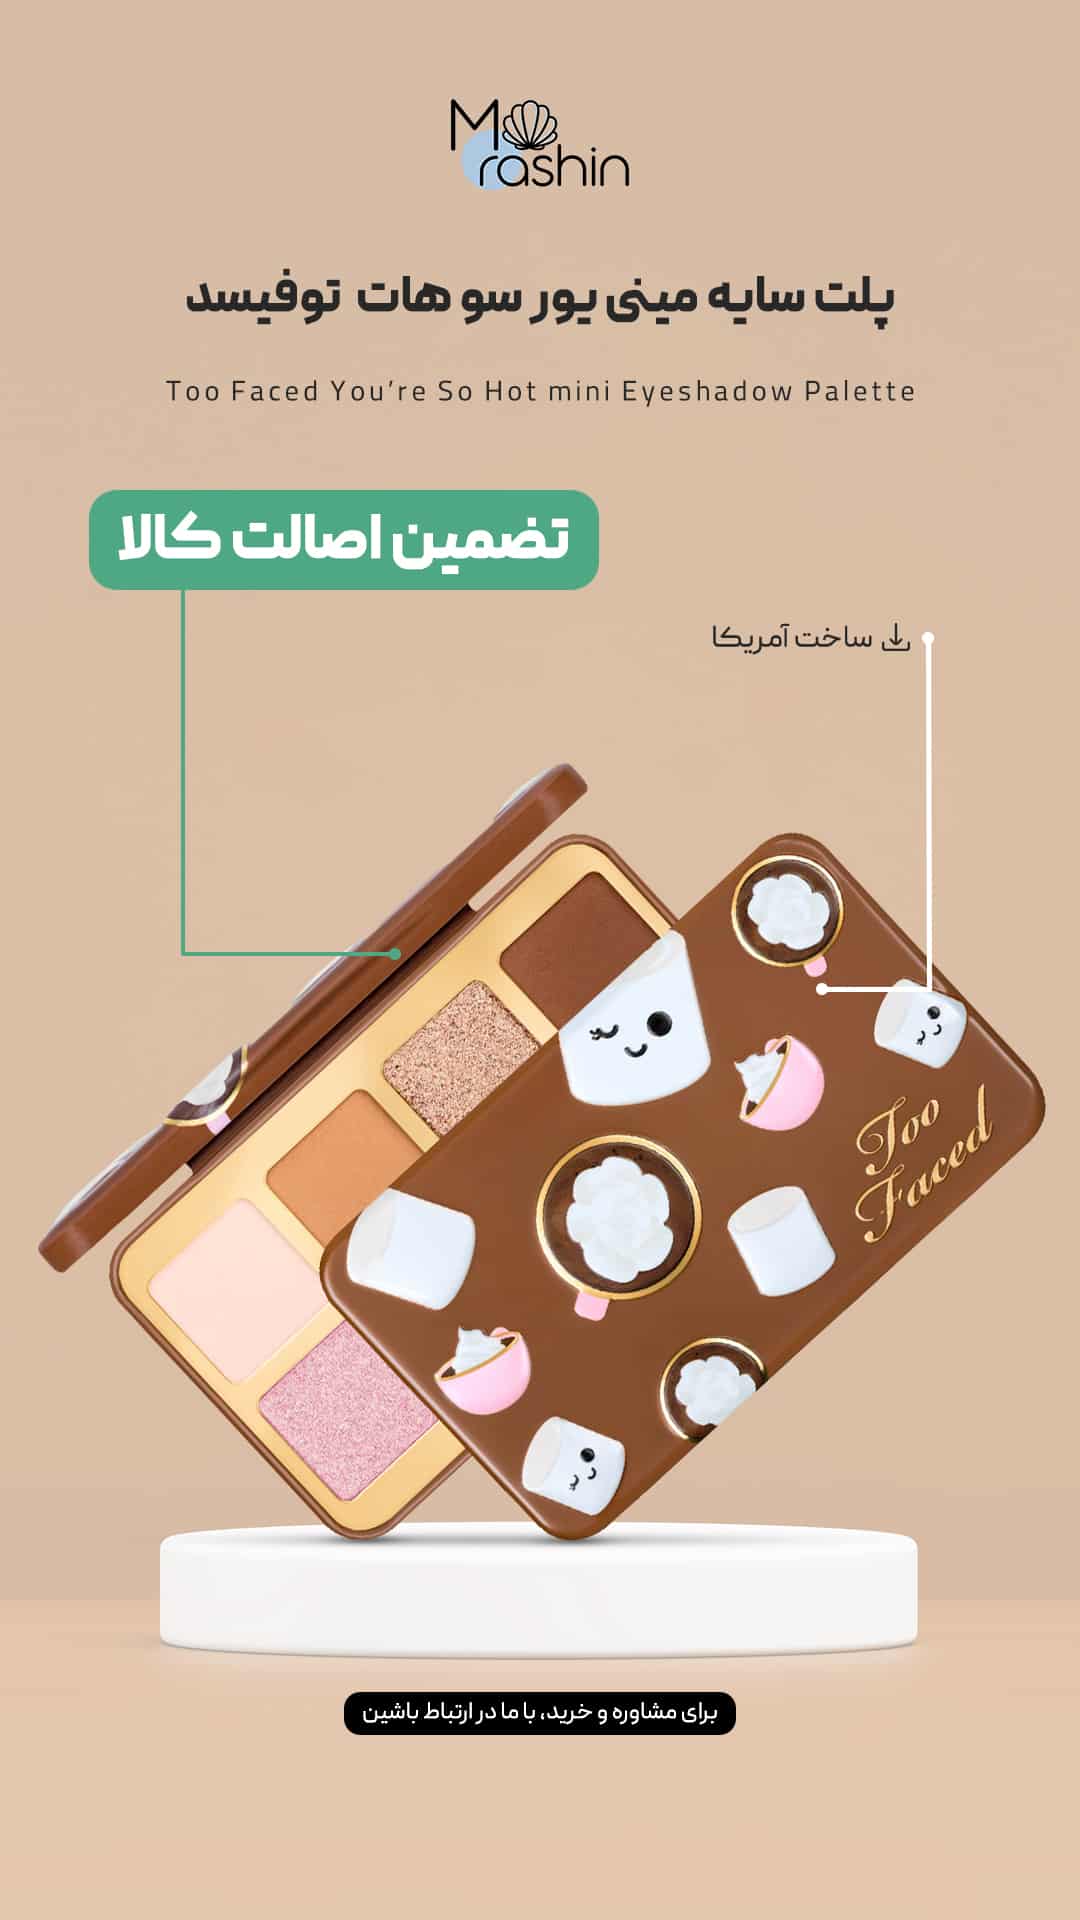 Too Faced Youre So Hot mini Eyeshadow Palette 0 | فروشگاه موراشین